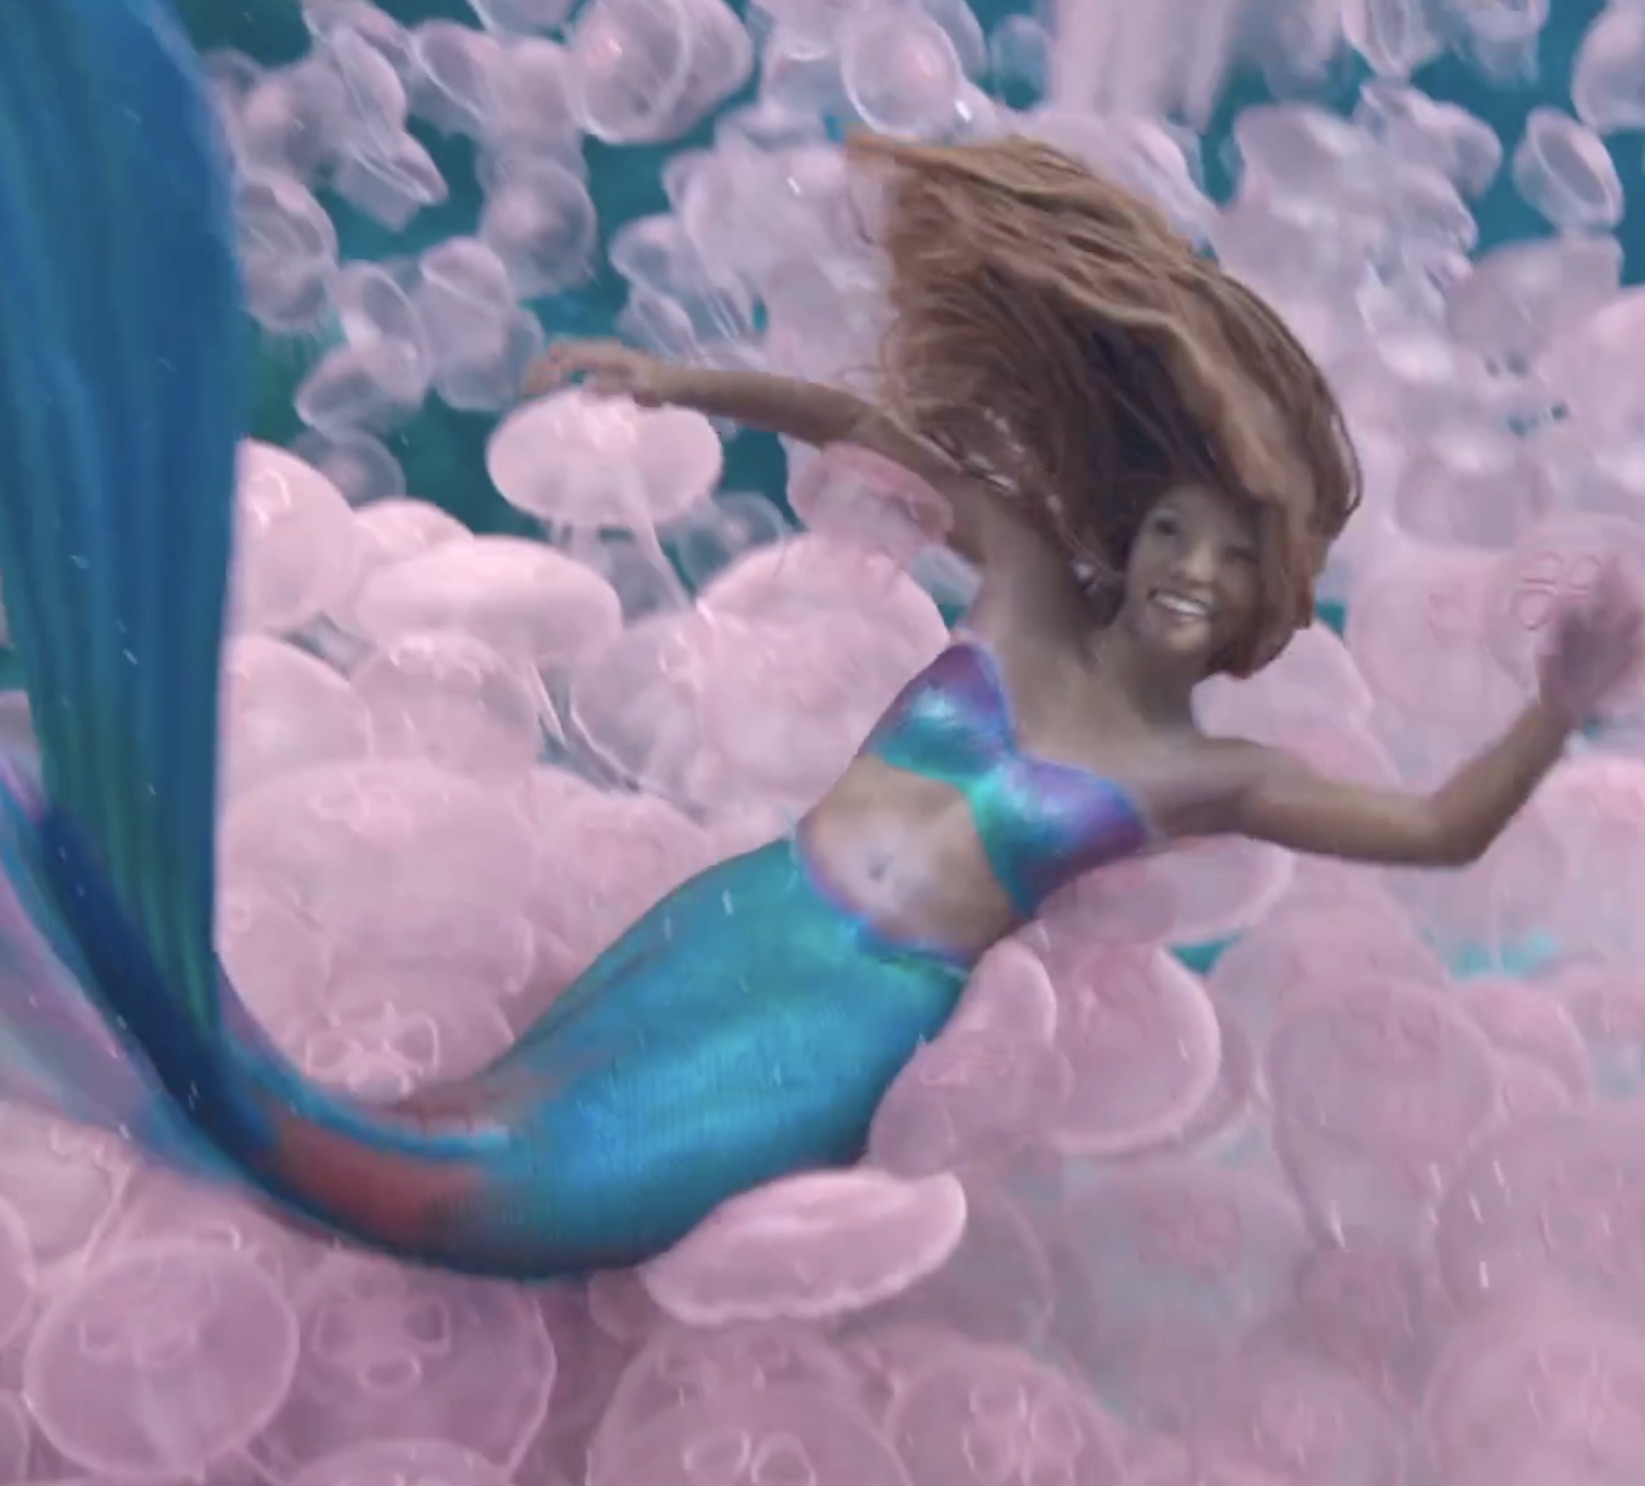 Halle Bailey Unveils STUNNING New Look at 'The Little Mermaid' [Trailer] That Grape Juice